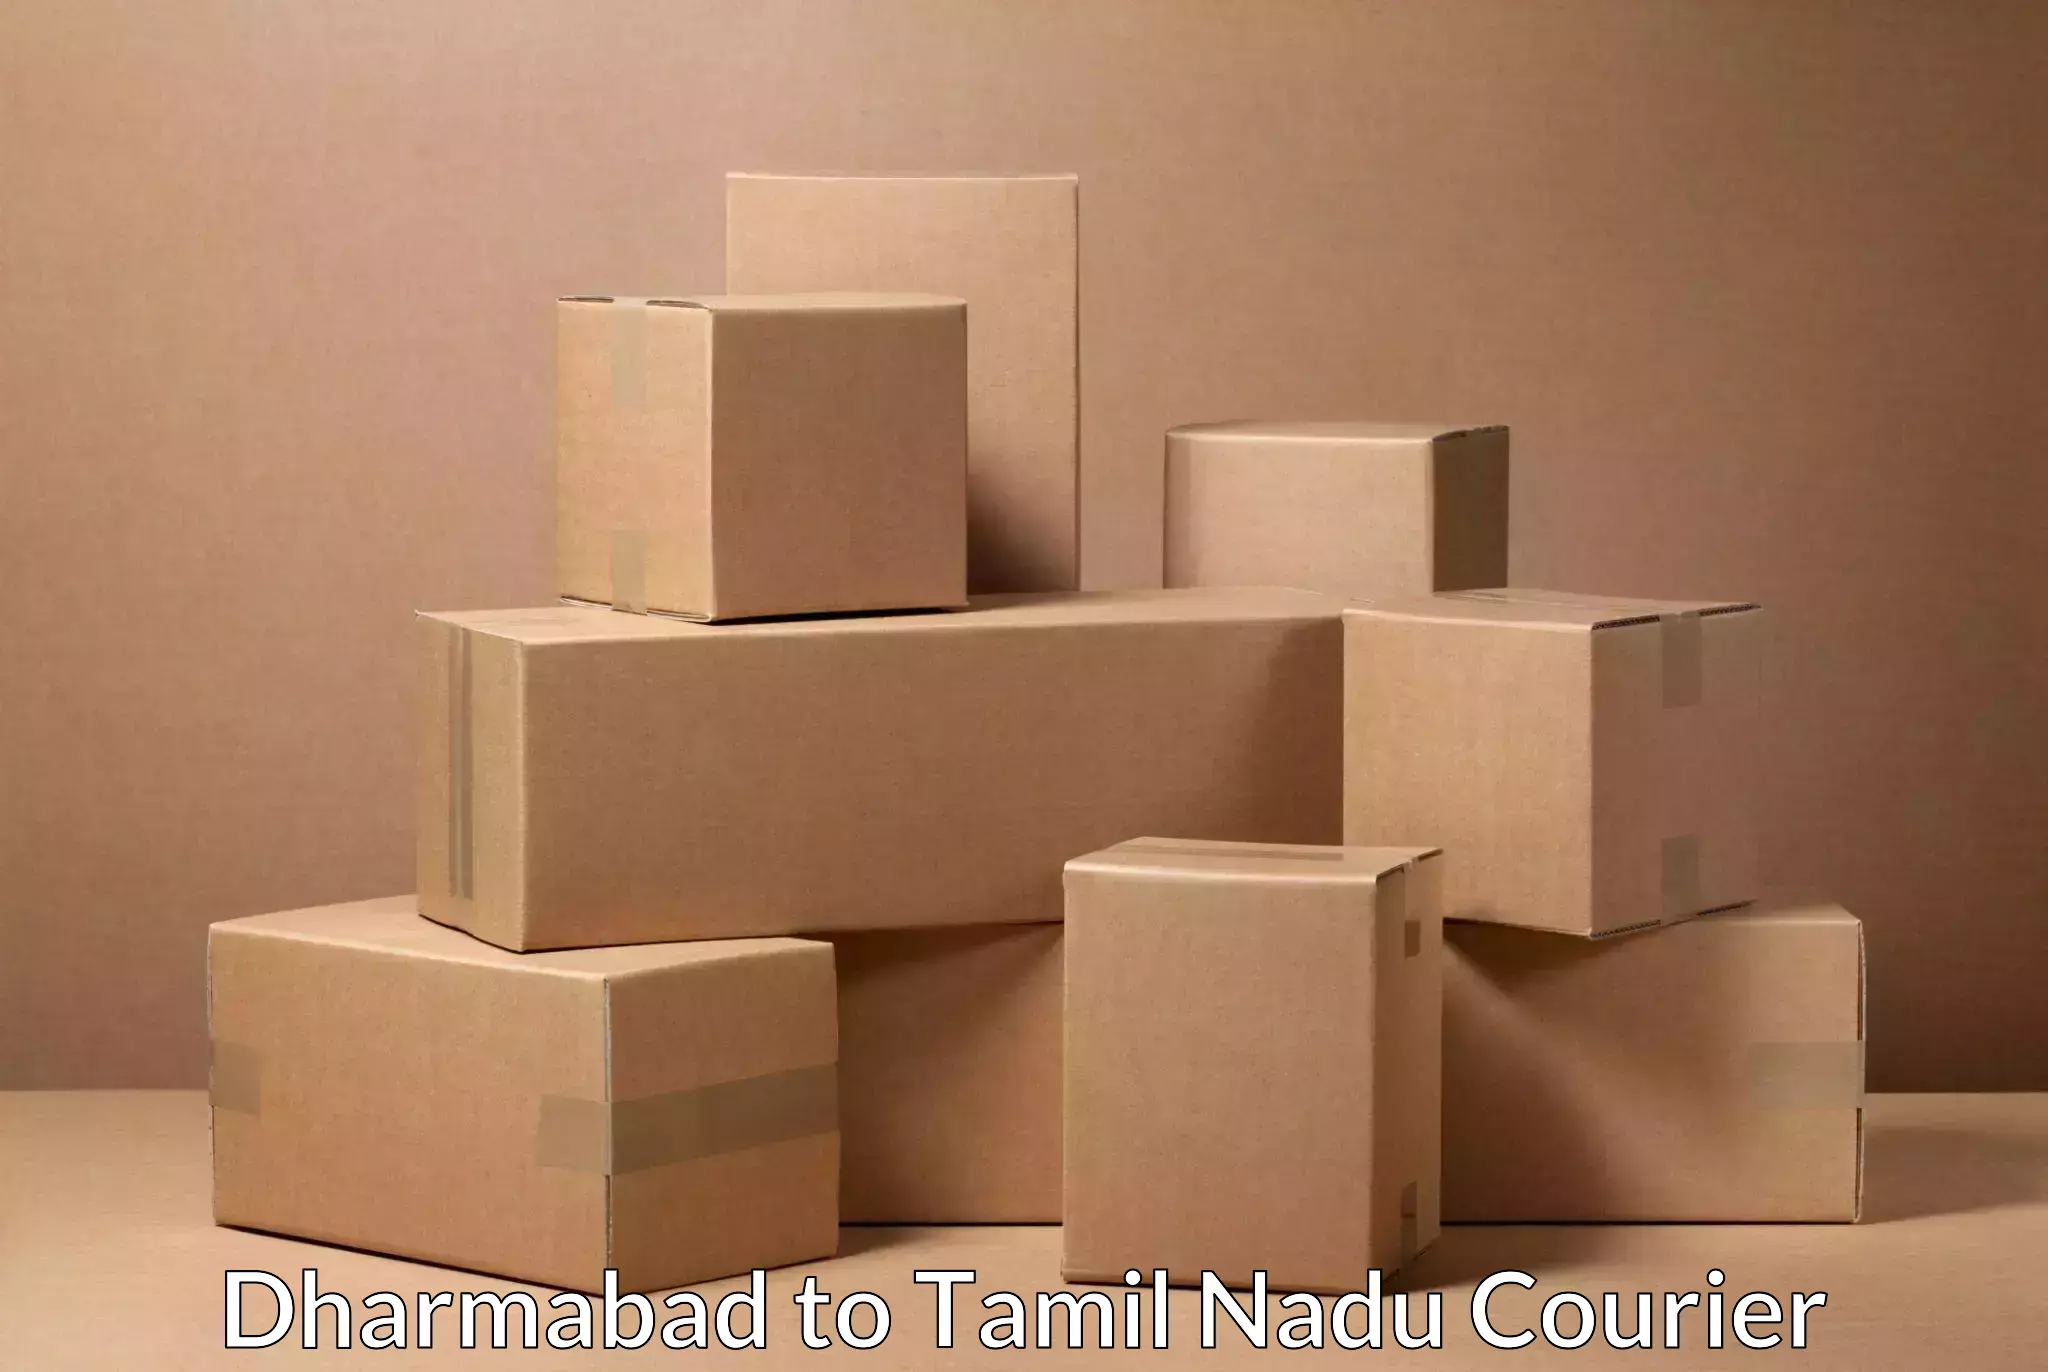 Personalized courier experiences Dharmabad to Sri Ramachandra Institute of Higher Education and Research Chennai